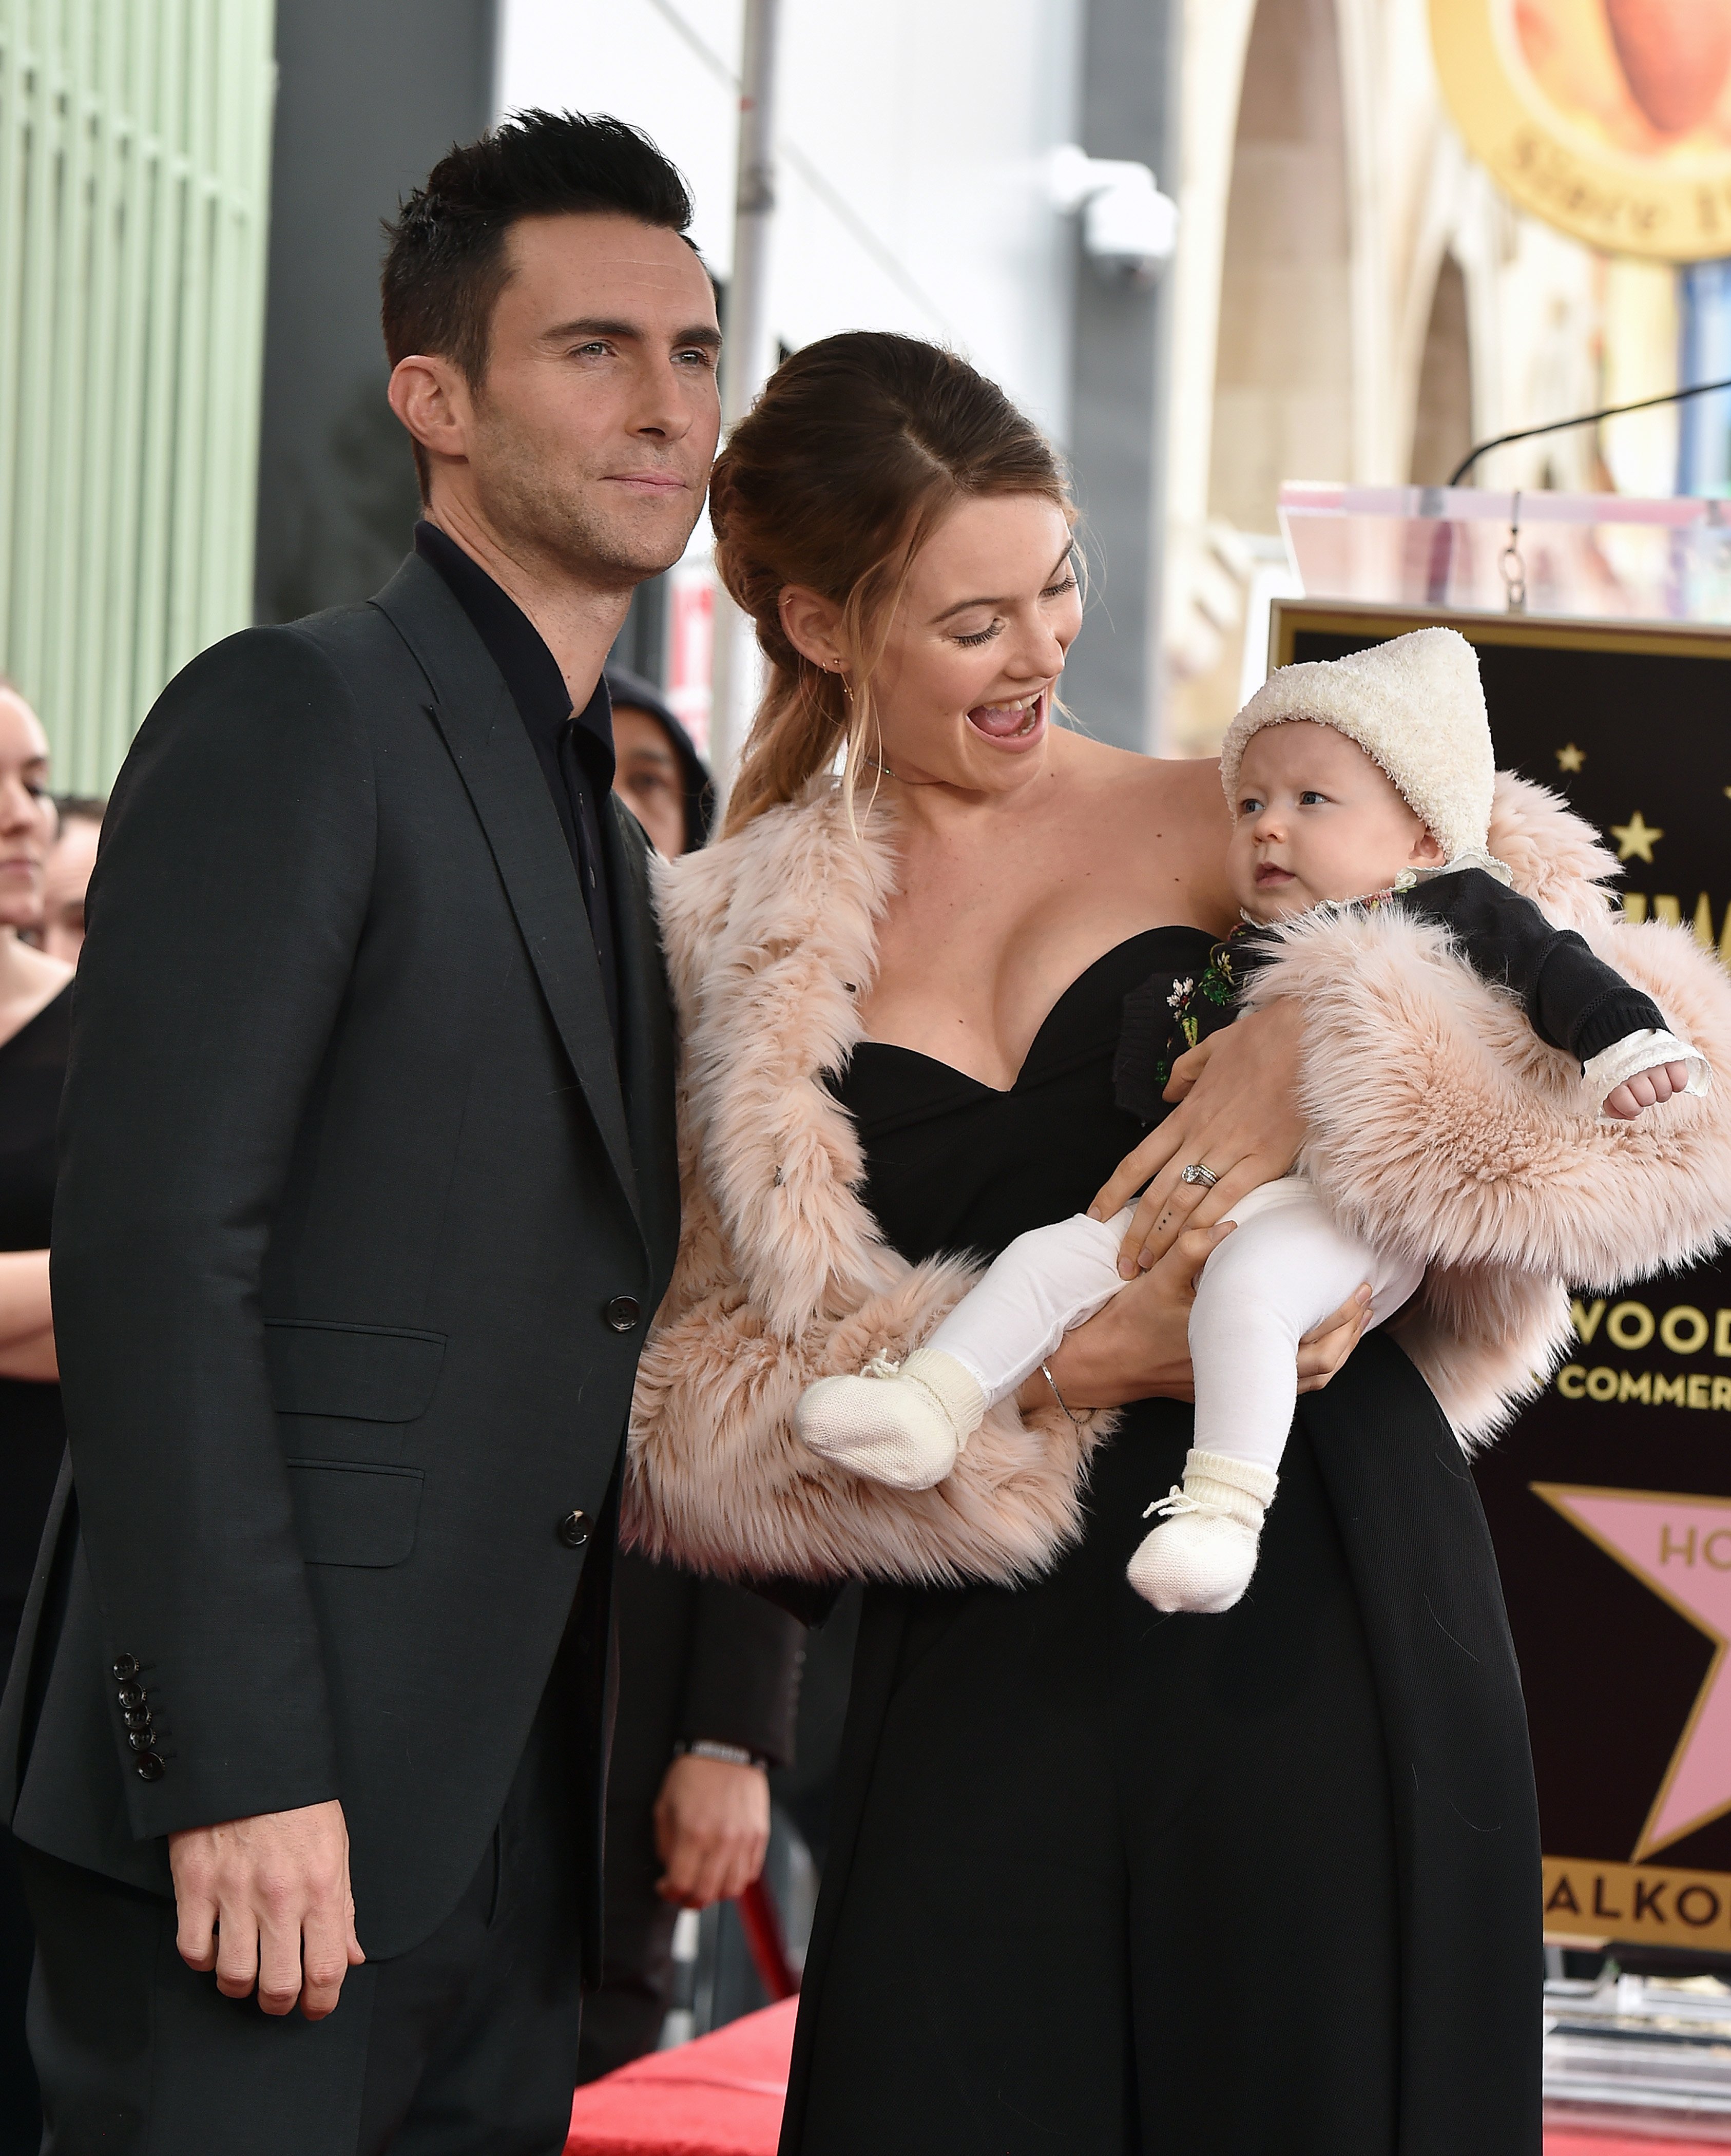 Adam Levine, his wife Behati Prinsloo, and their daughter Dusty Rose Levine at the Hollywood Walk of Fame on February 10, 2017, in Hollywood, California | Source: Getty Images